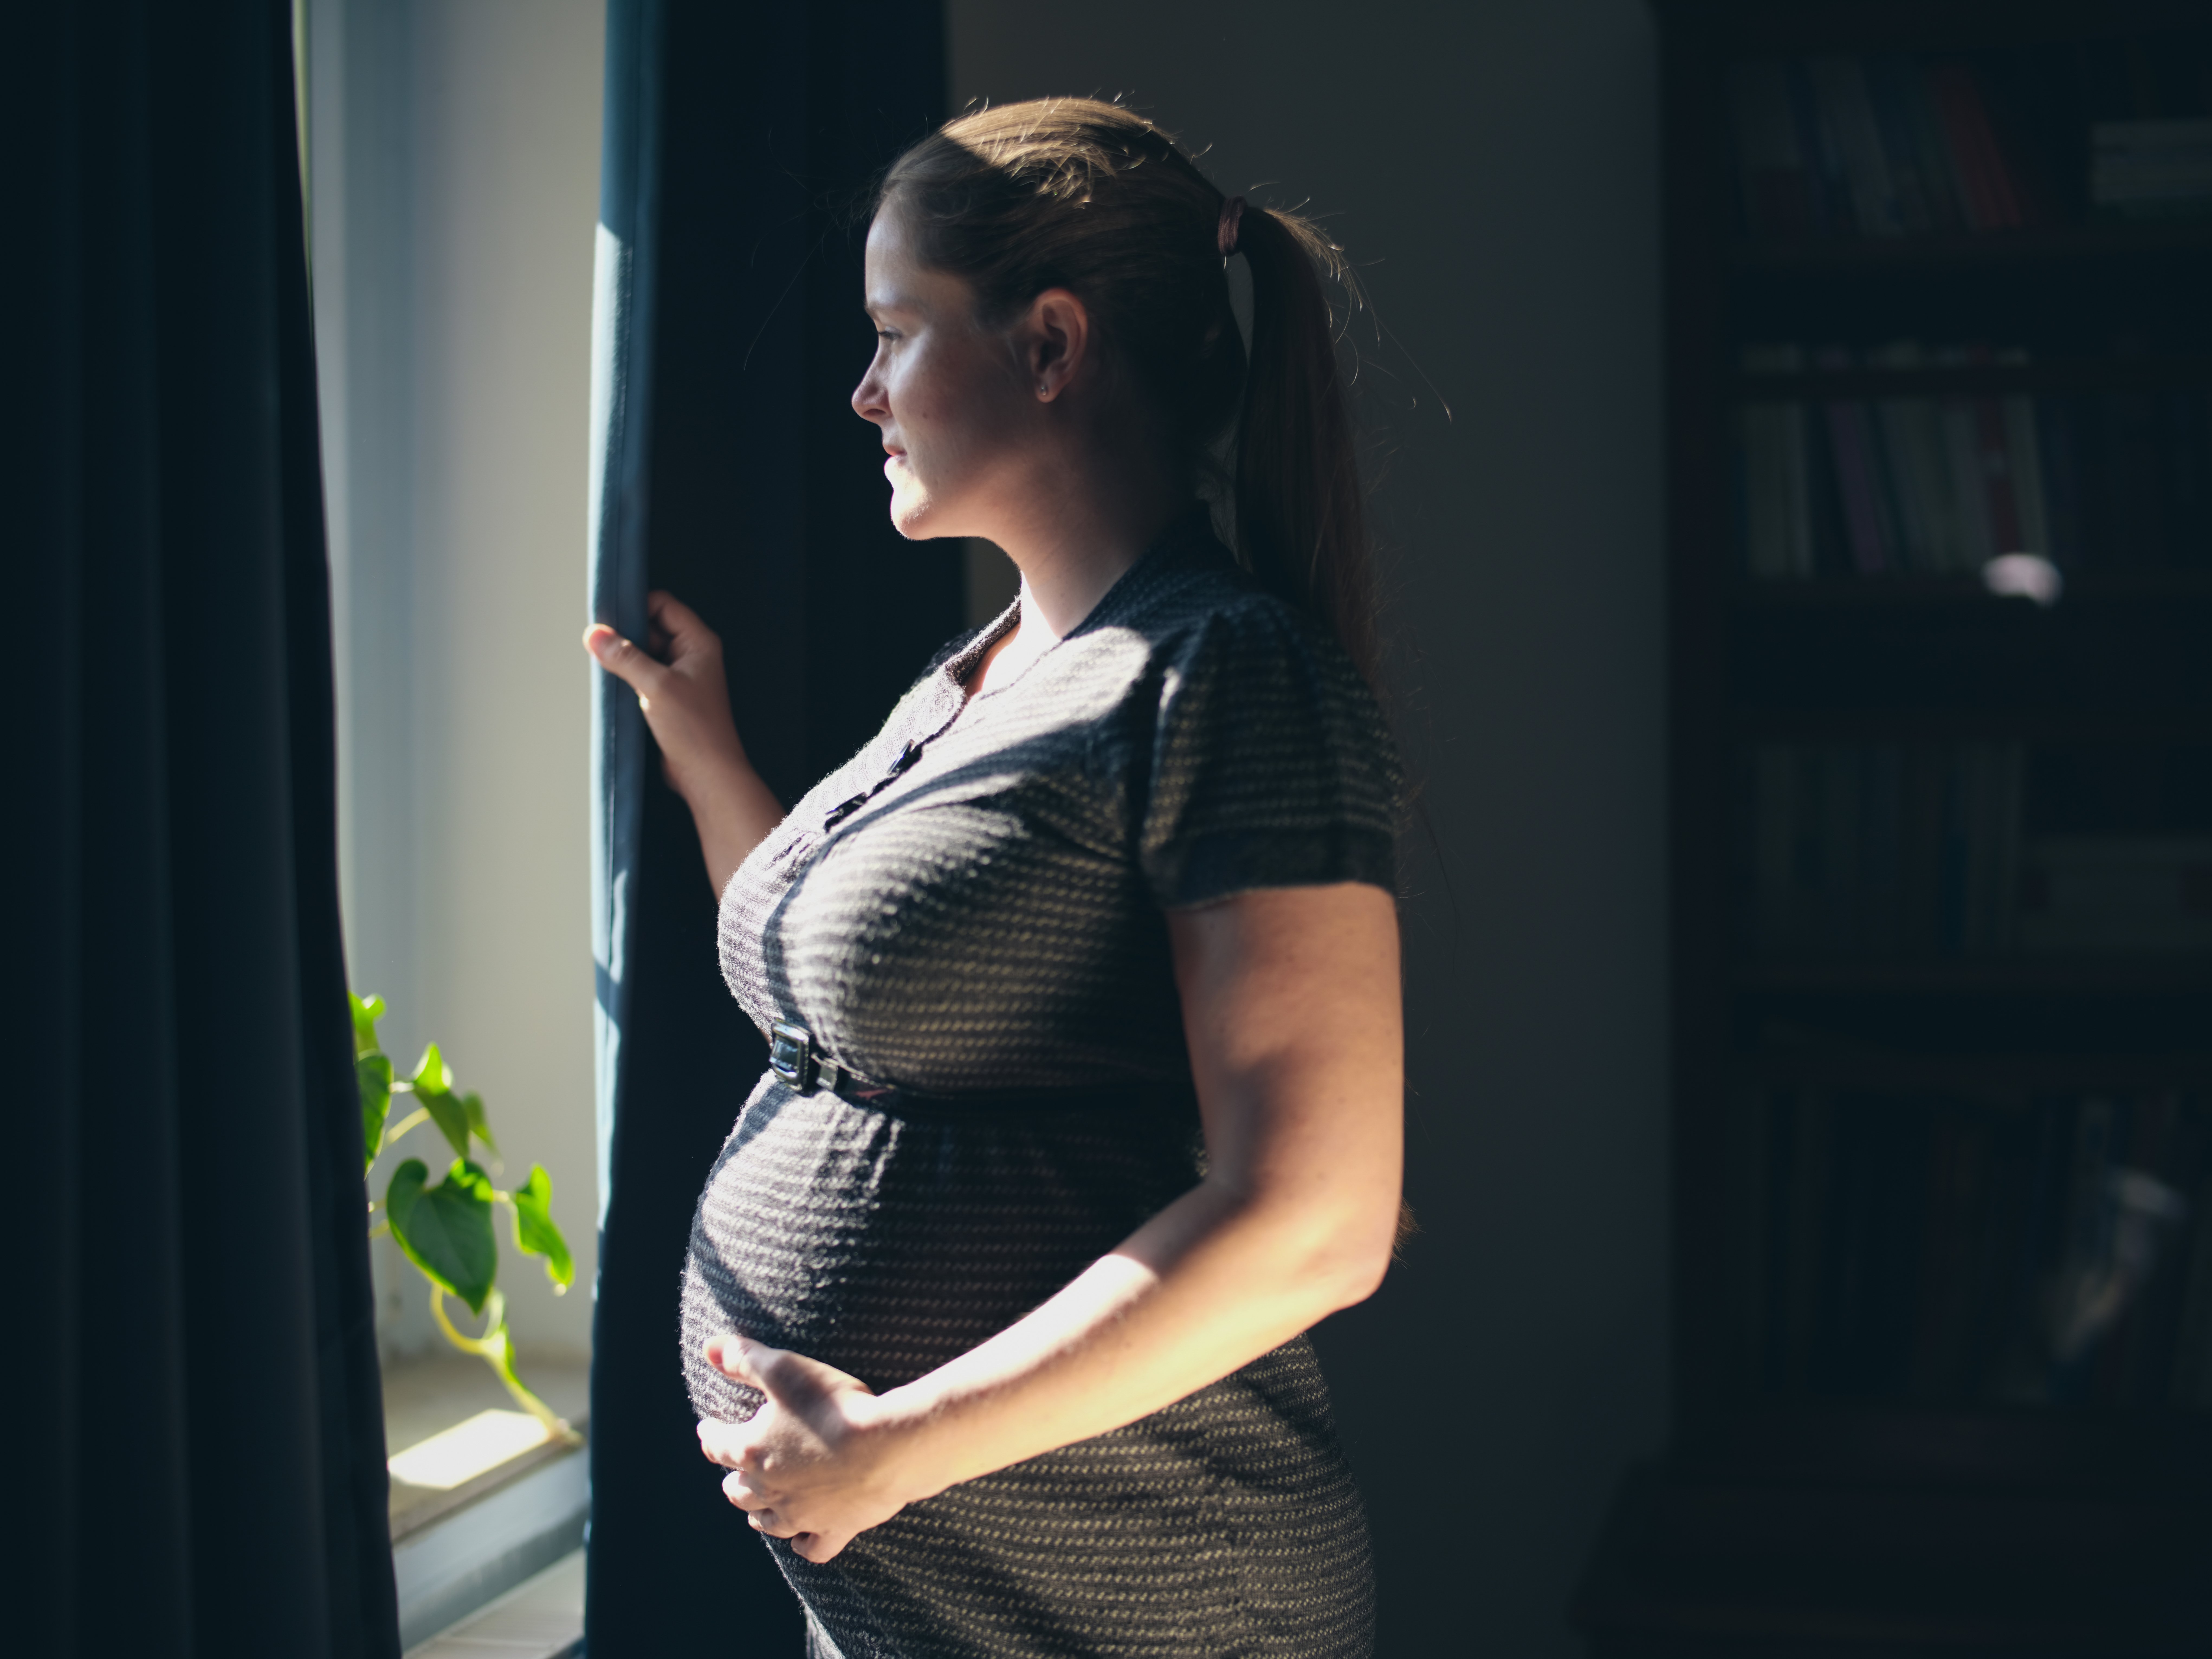 A pregnant woman looking out a window | Source: Shutterstock